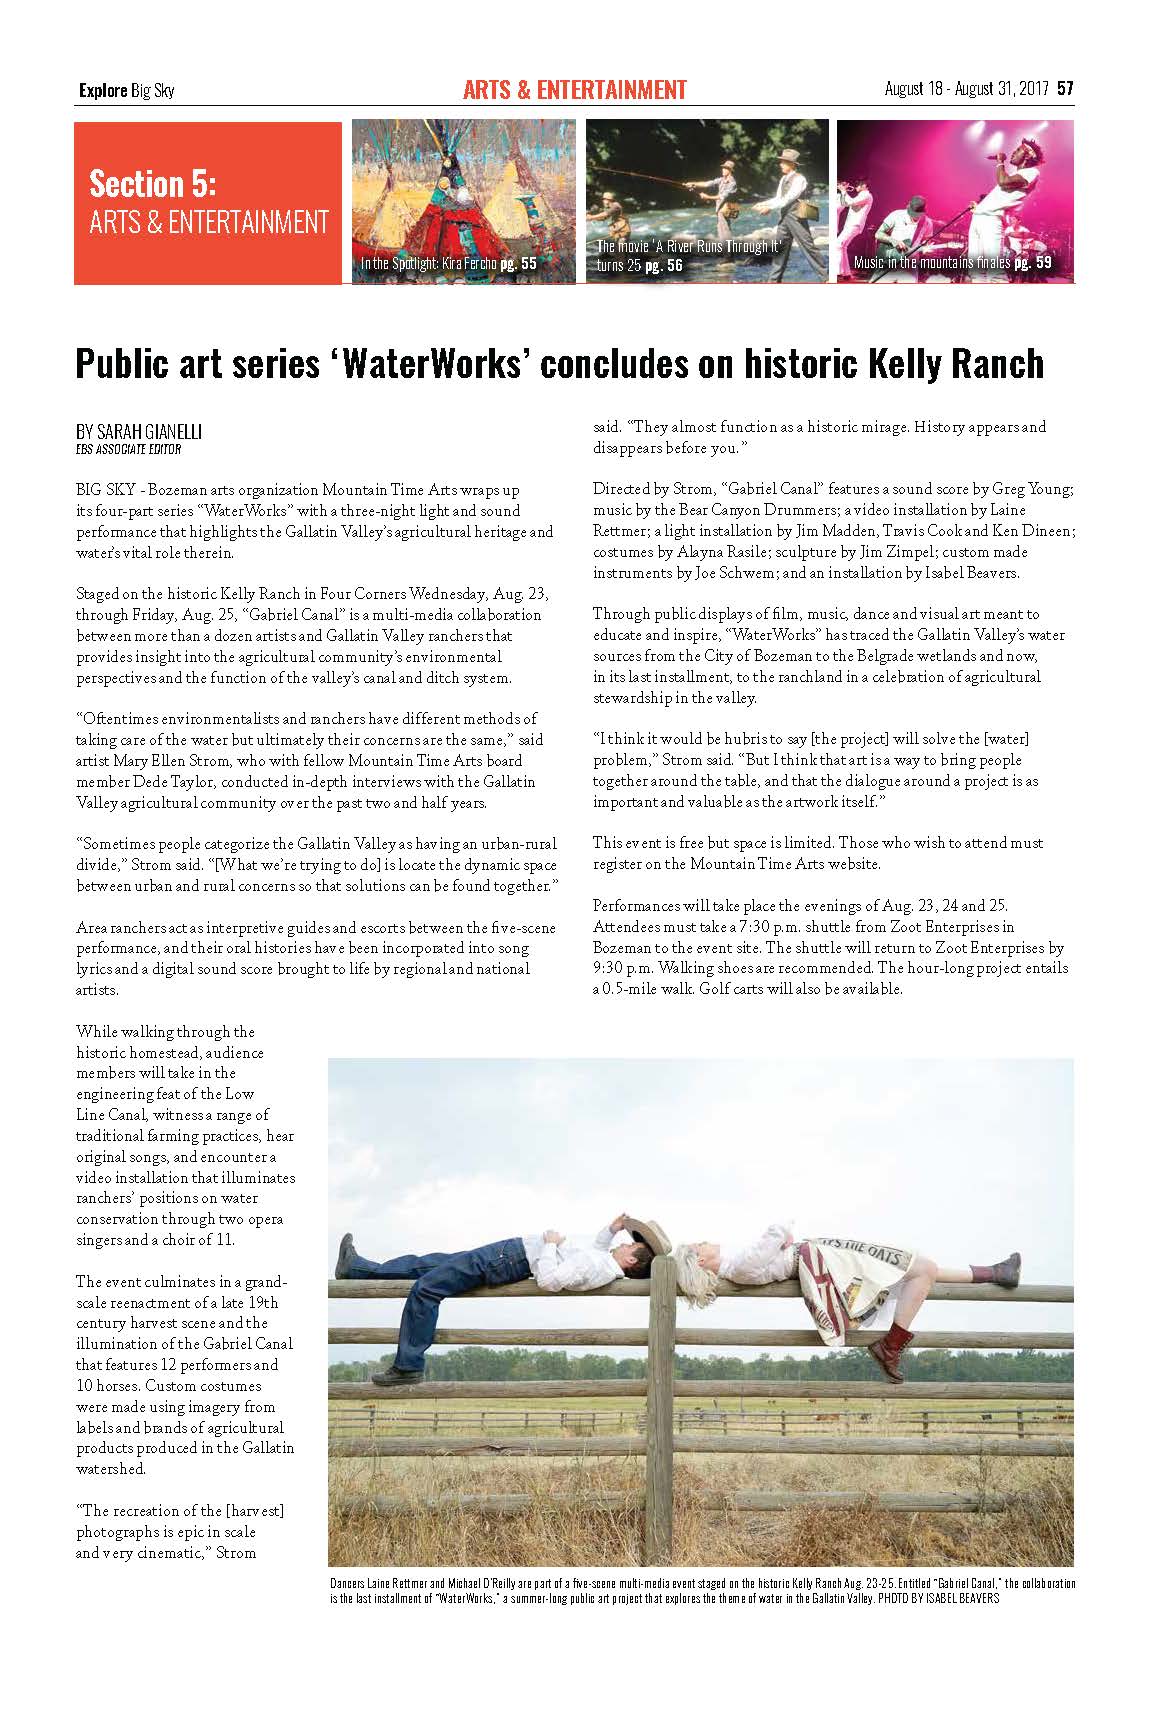 Explore Big Sky, August 2017: Public art series ‘WaterWorks’ concludes on historic Kelly Ranch